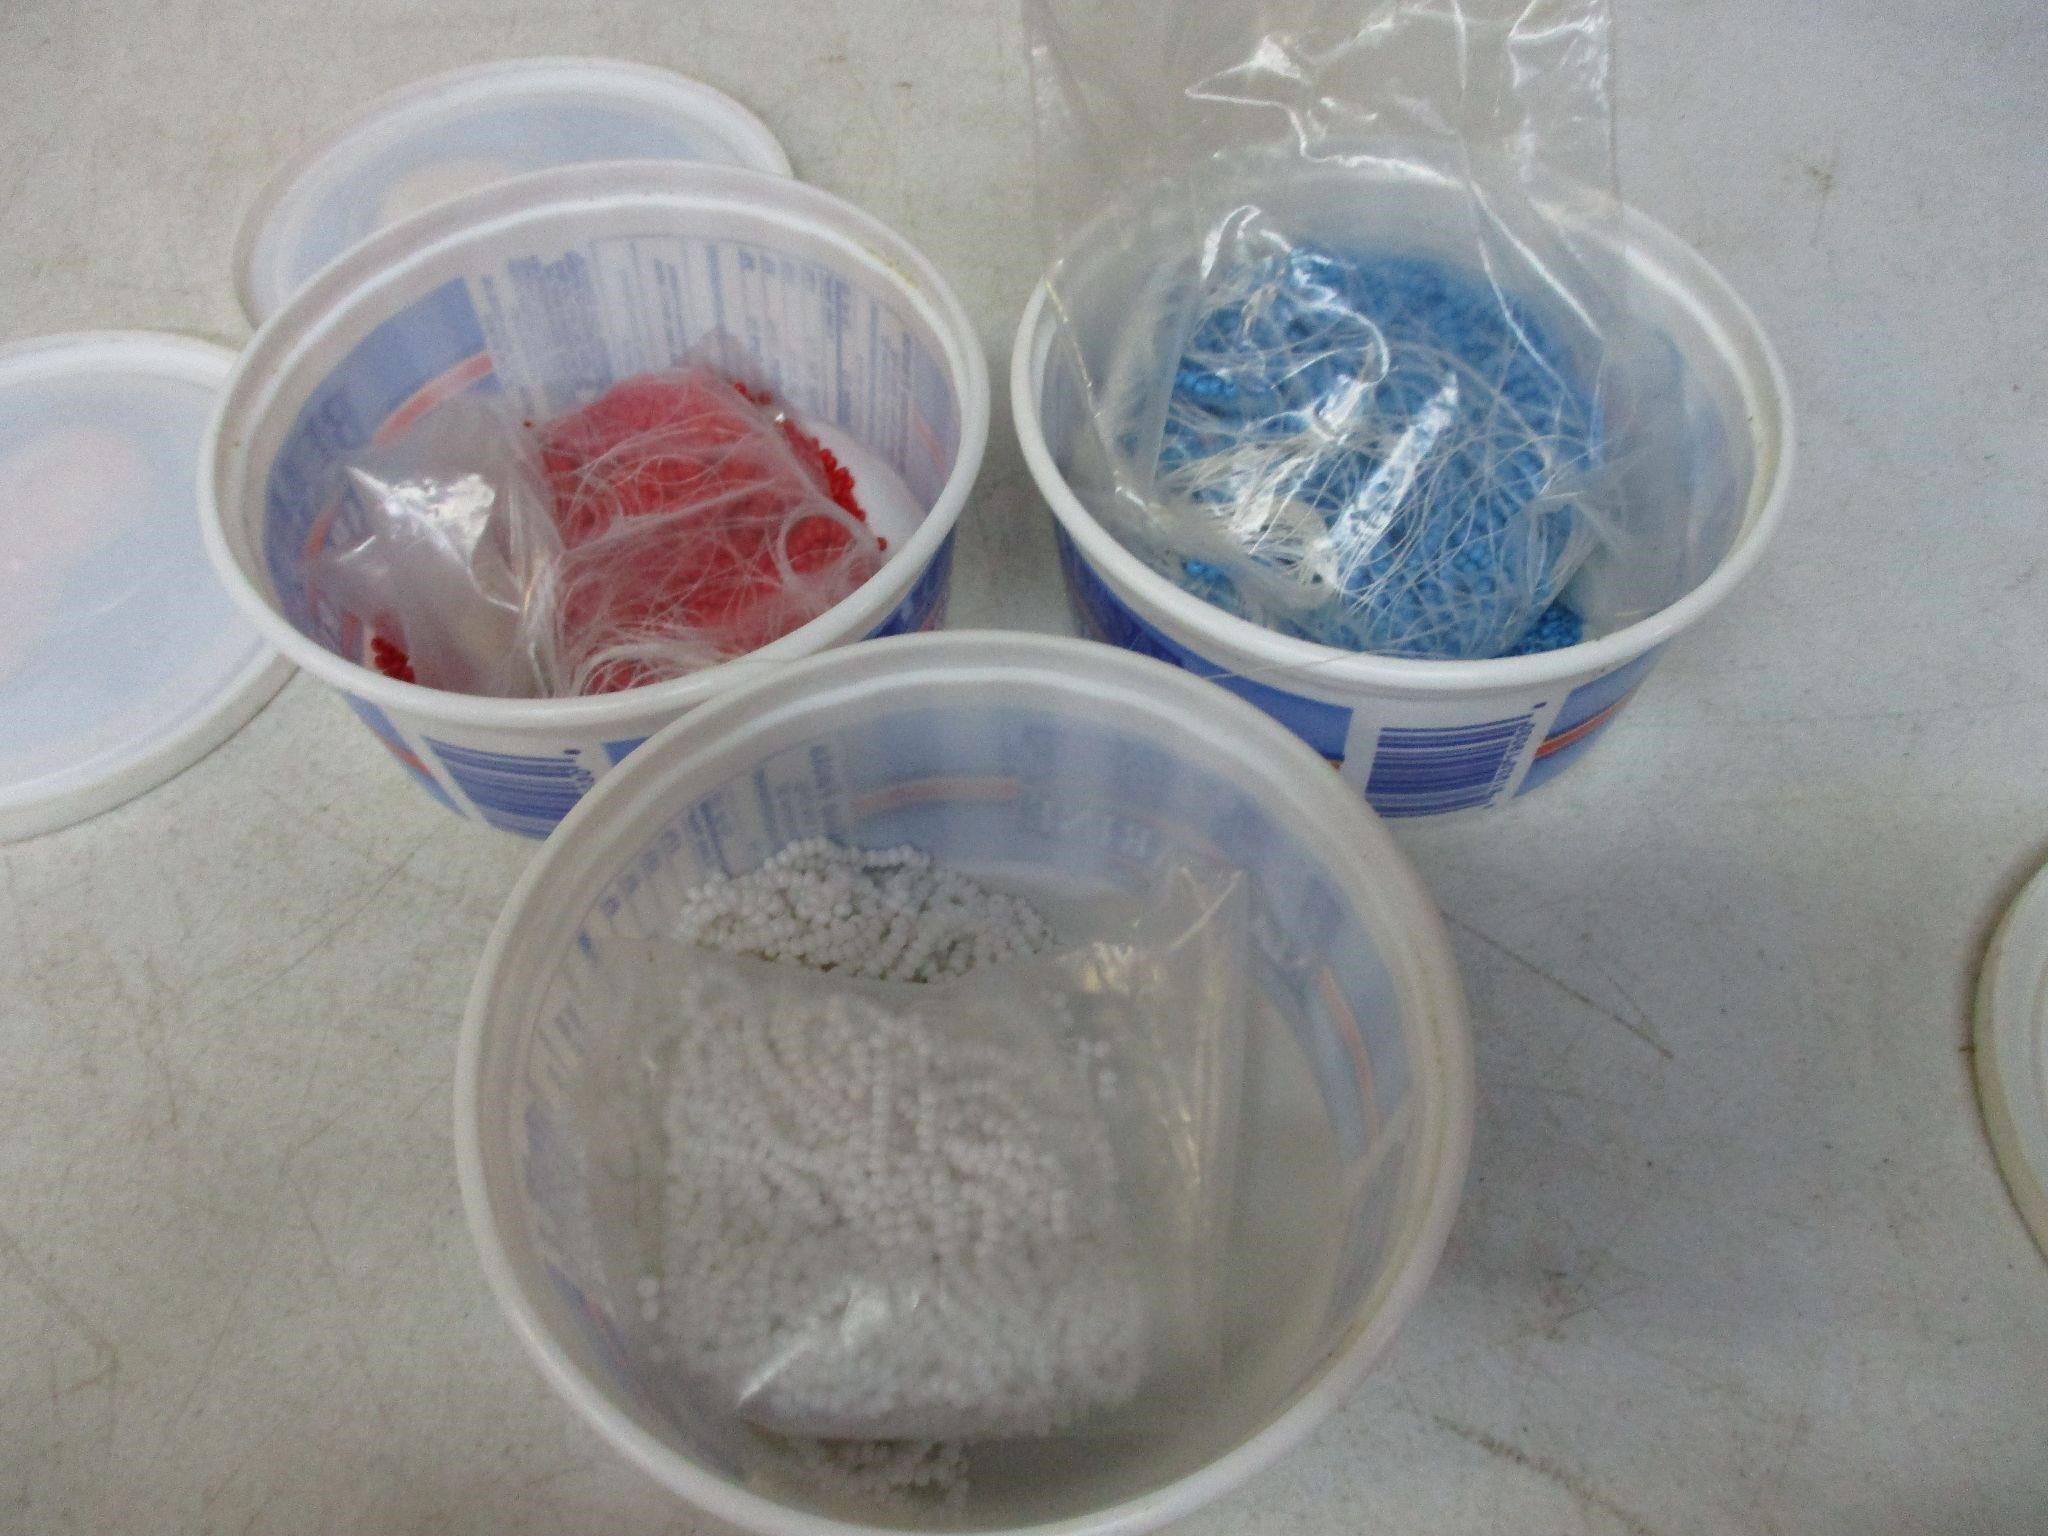 3 Containers of Seed Beads